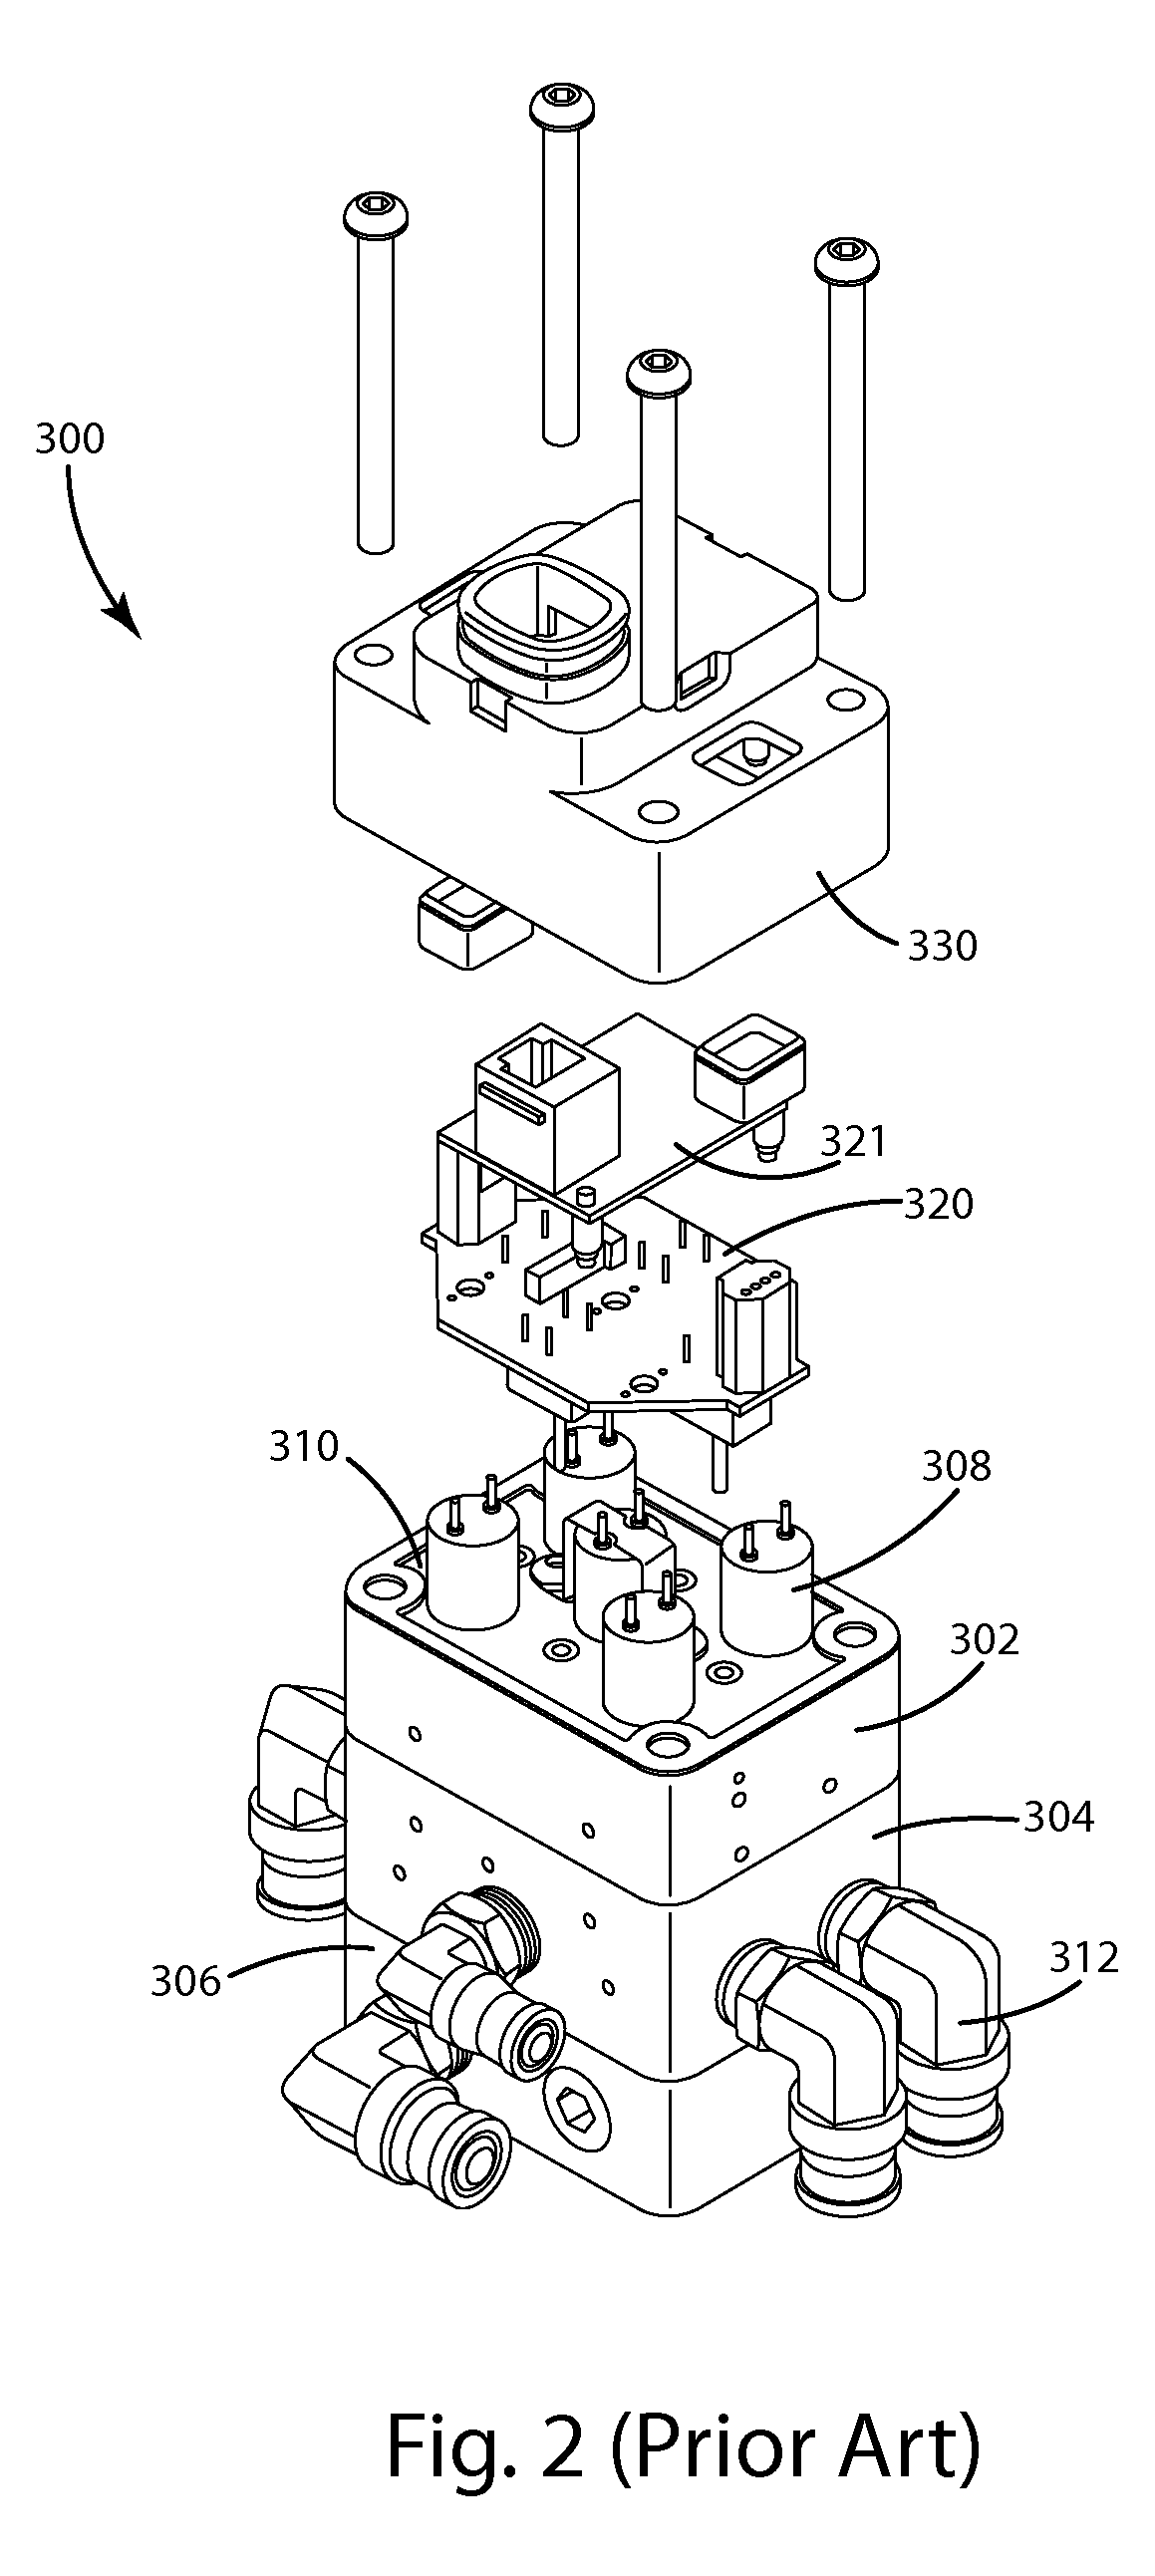 Integrated manifold system for controlling an air suspension